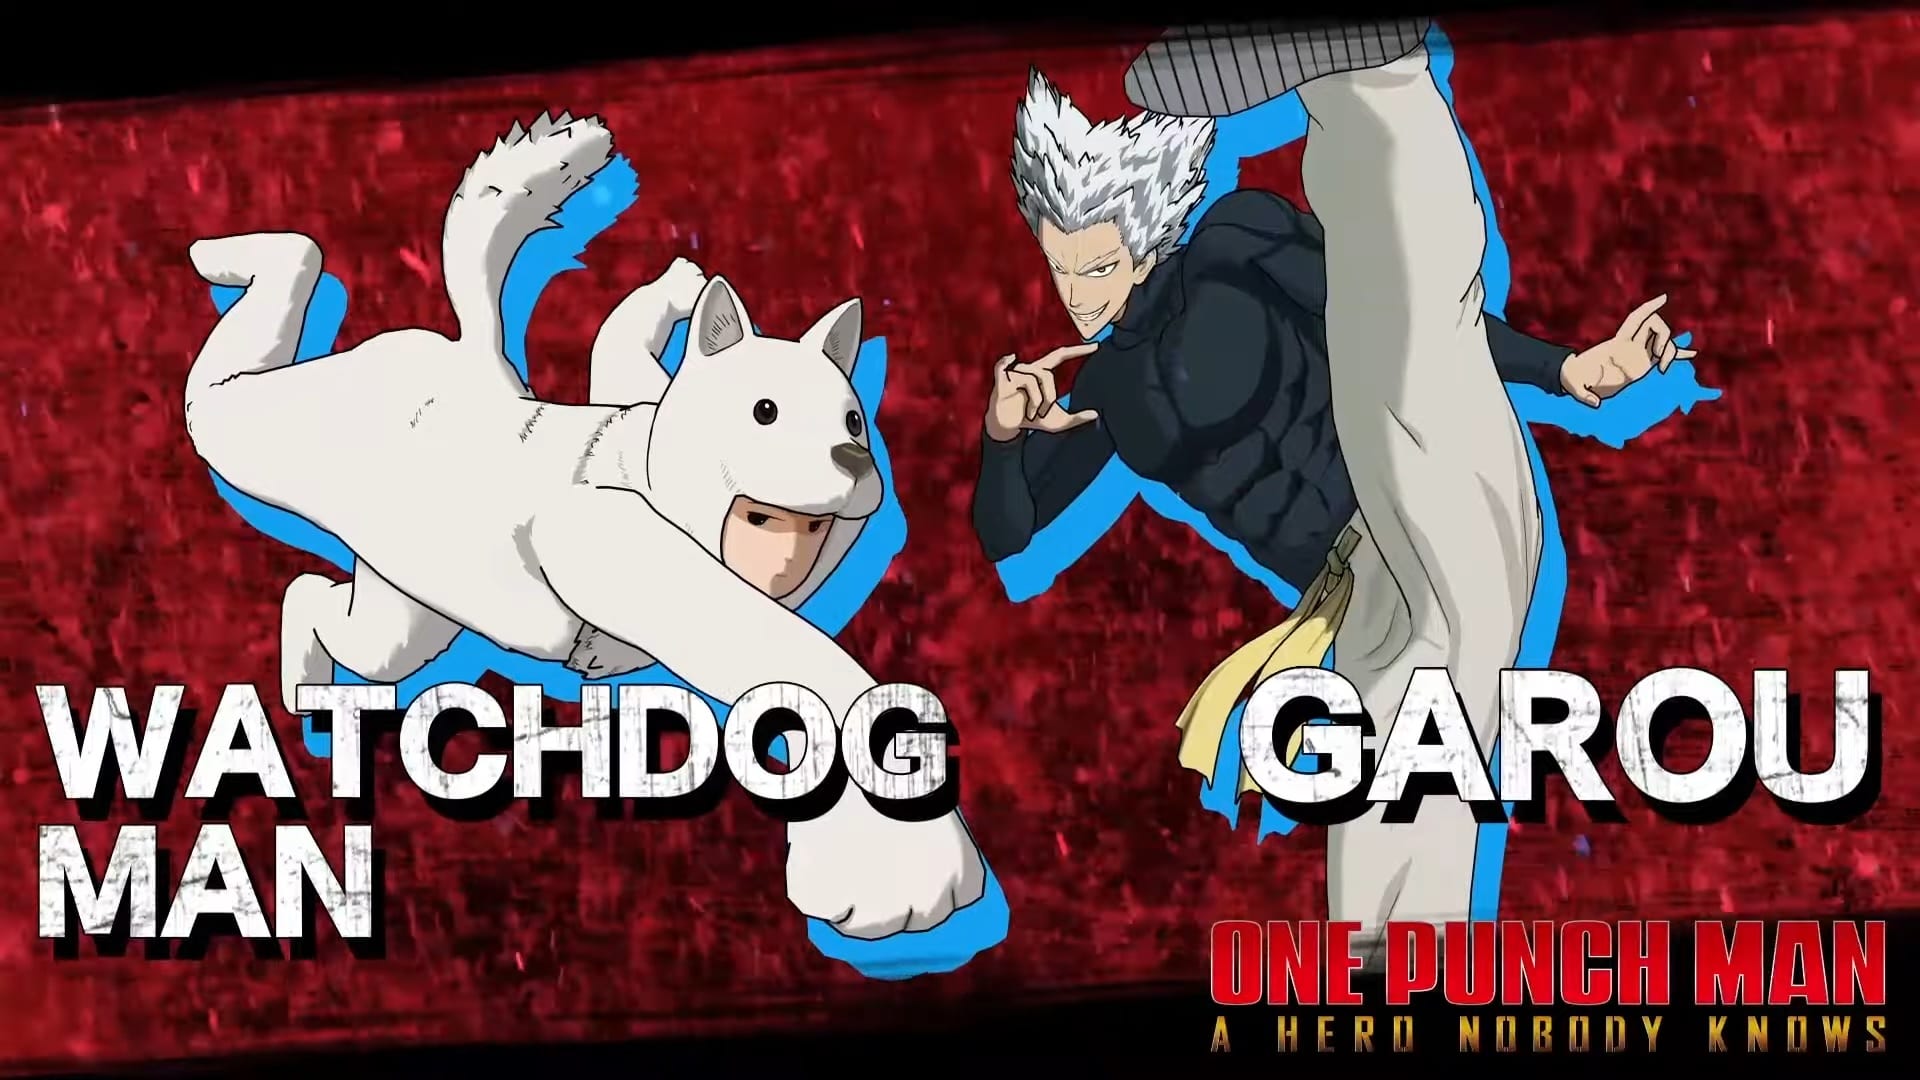 Watchdog Man & Garou To Join The Fight In ONE PUNCH MAN: A Hero Nobody Knows Roster